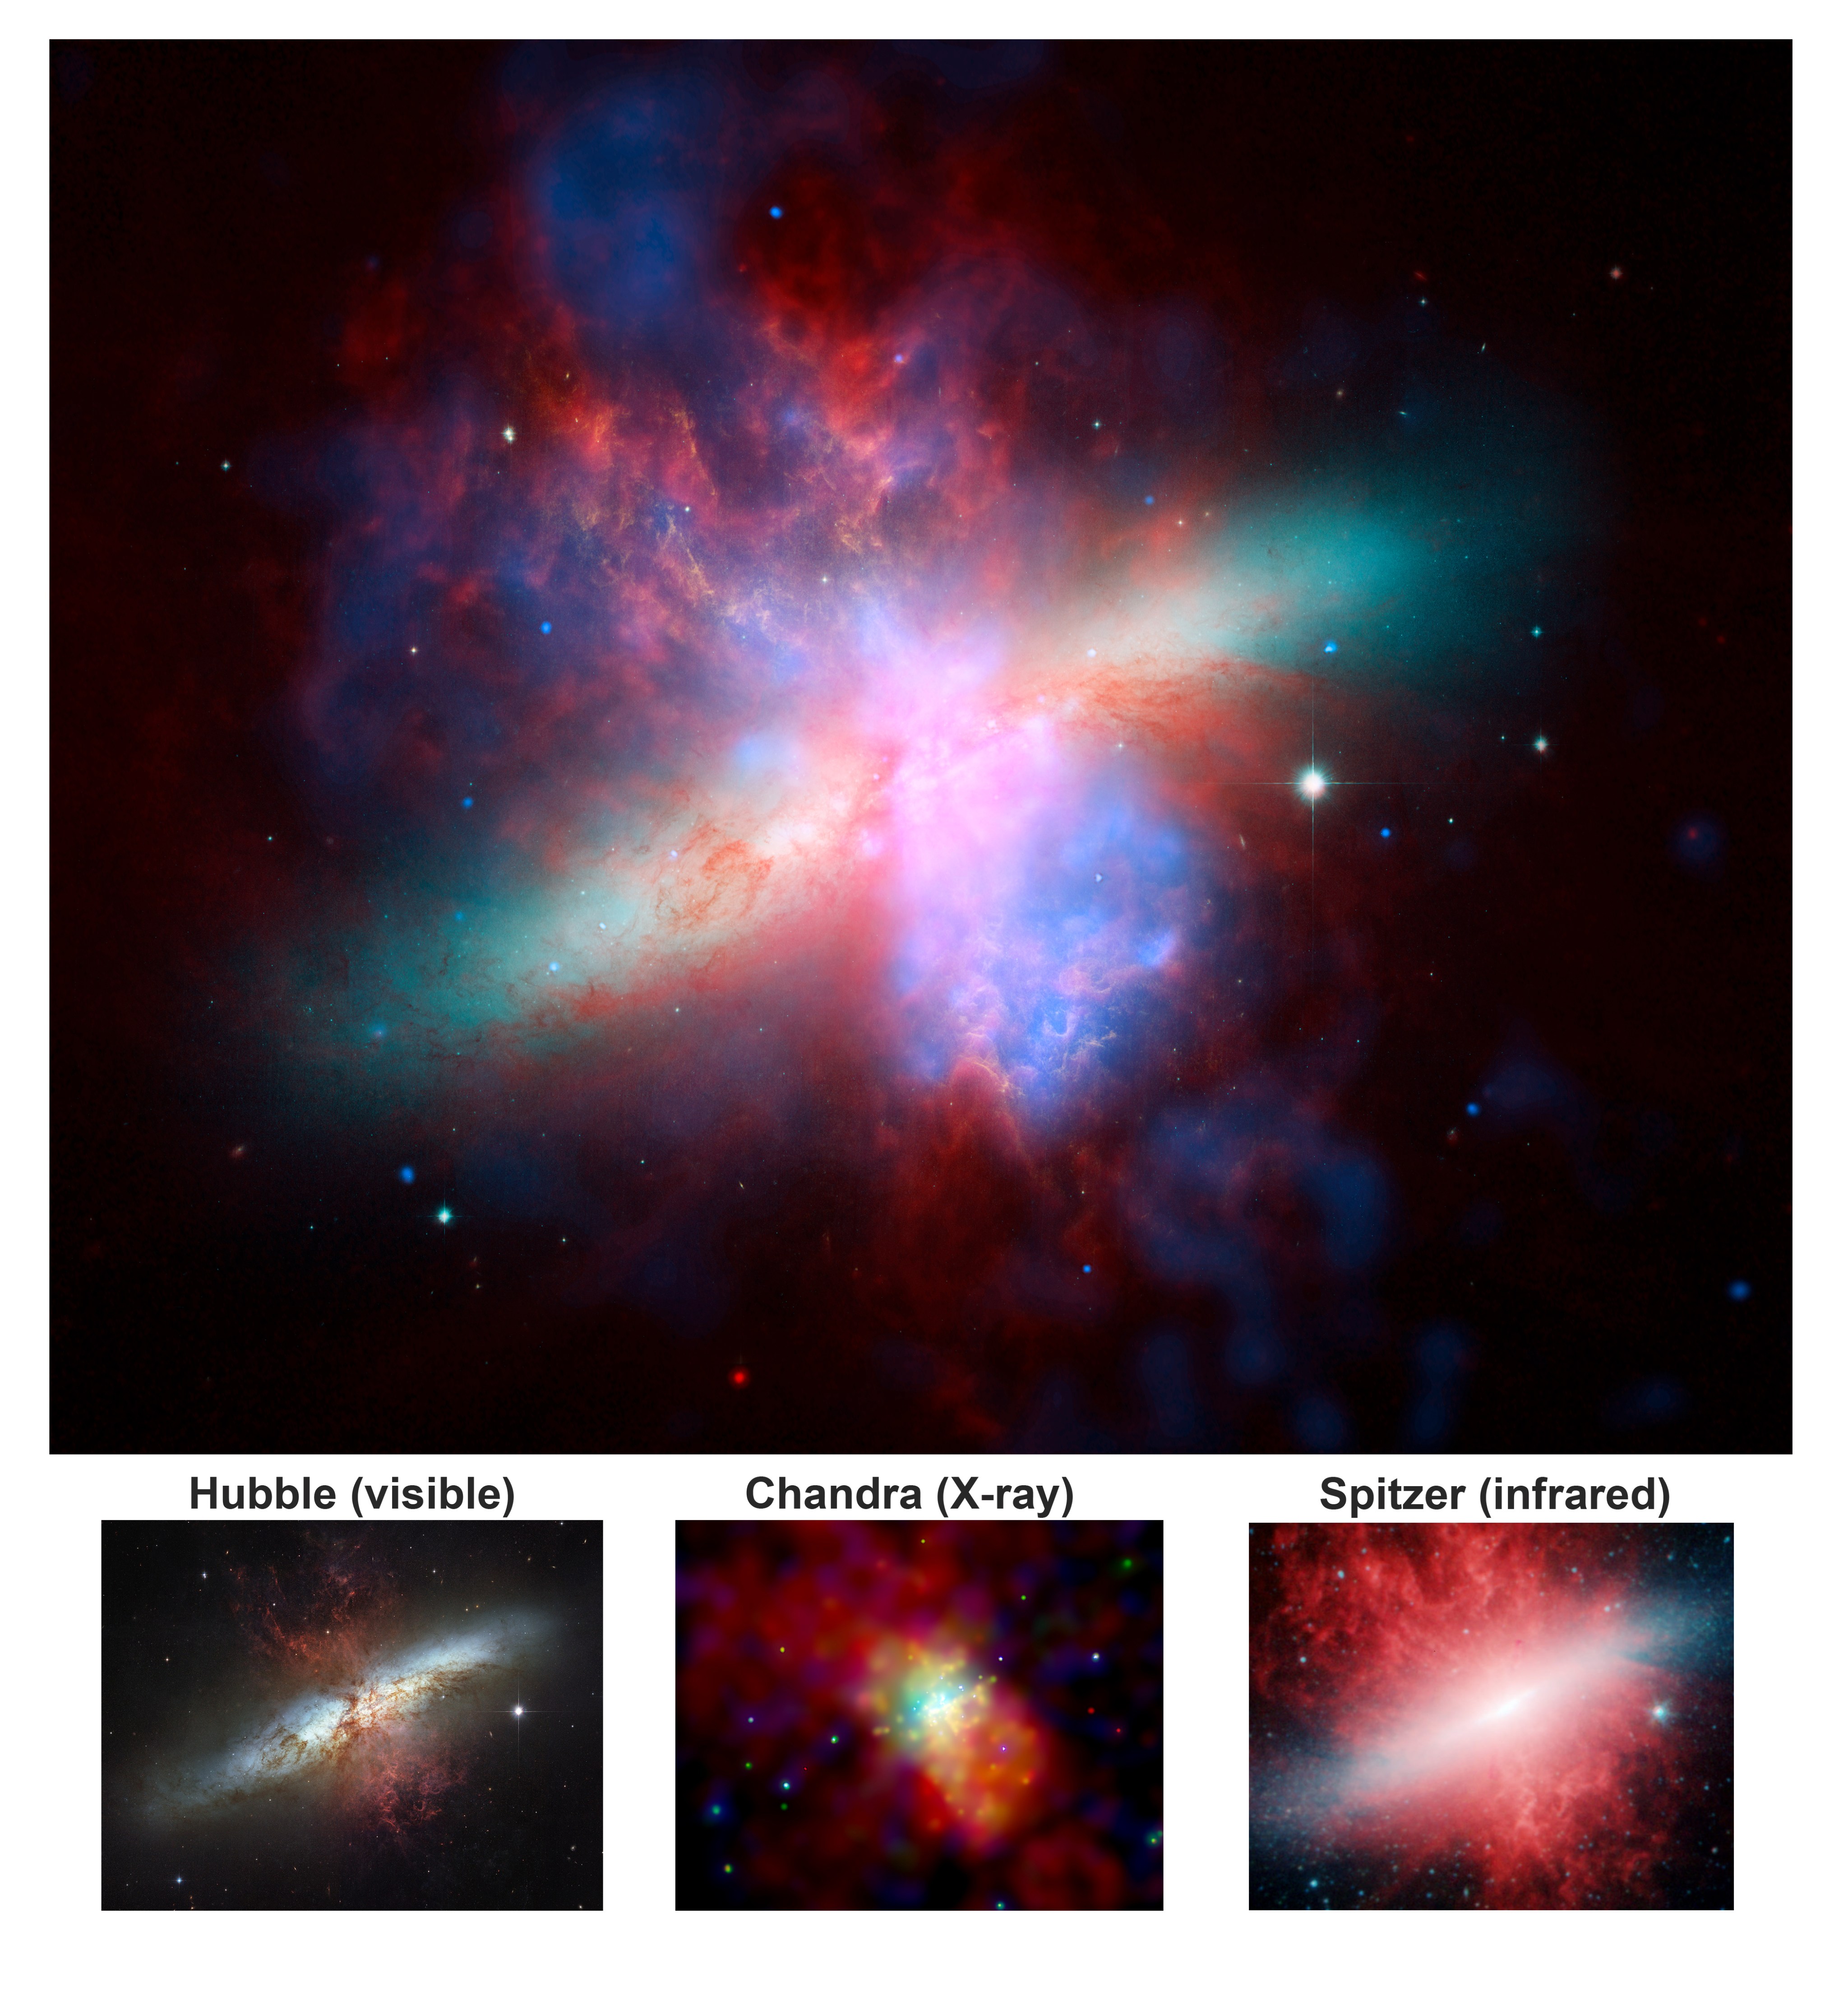 Top: Large composite image of M82 in colors of pink, red, green, white, yellow, and blue on a black background. Bottom: Three smaller image taken by Hubble (left), Chandra (center), and Spitzer (right).